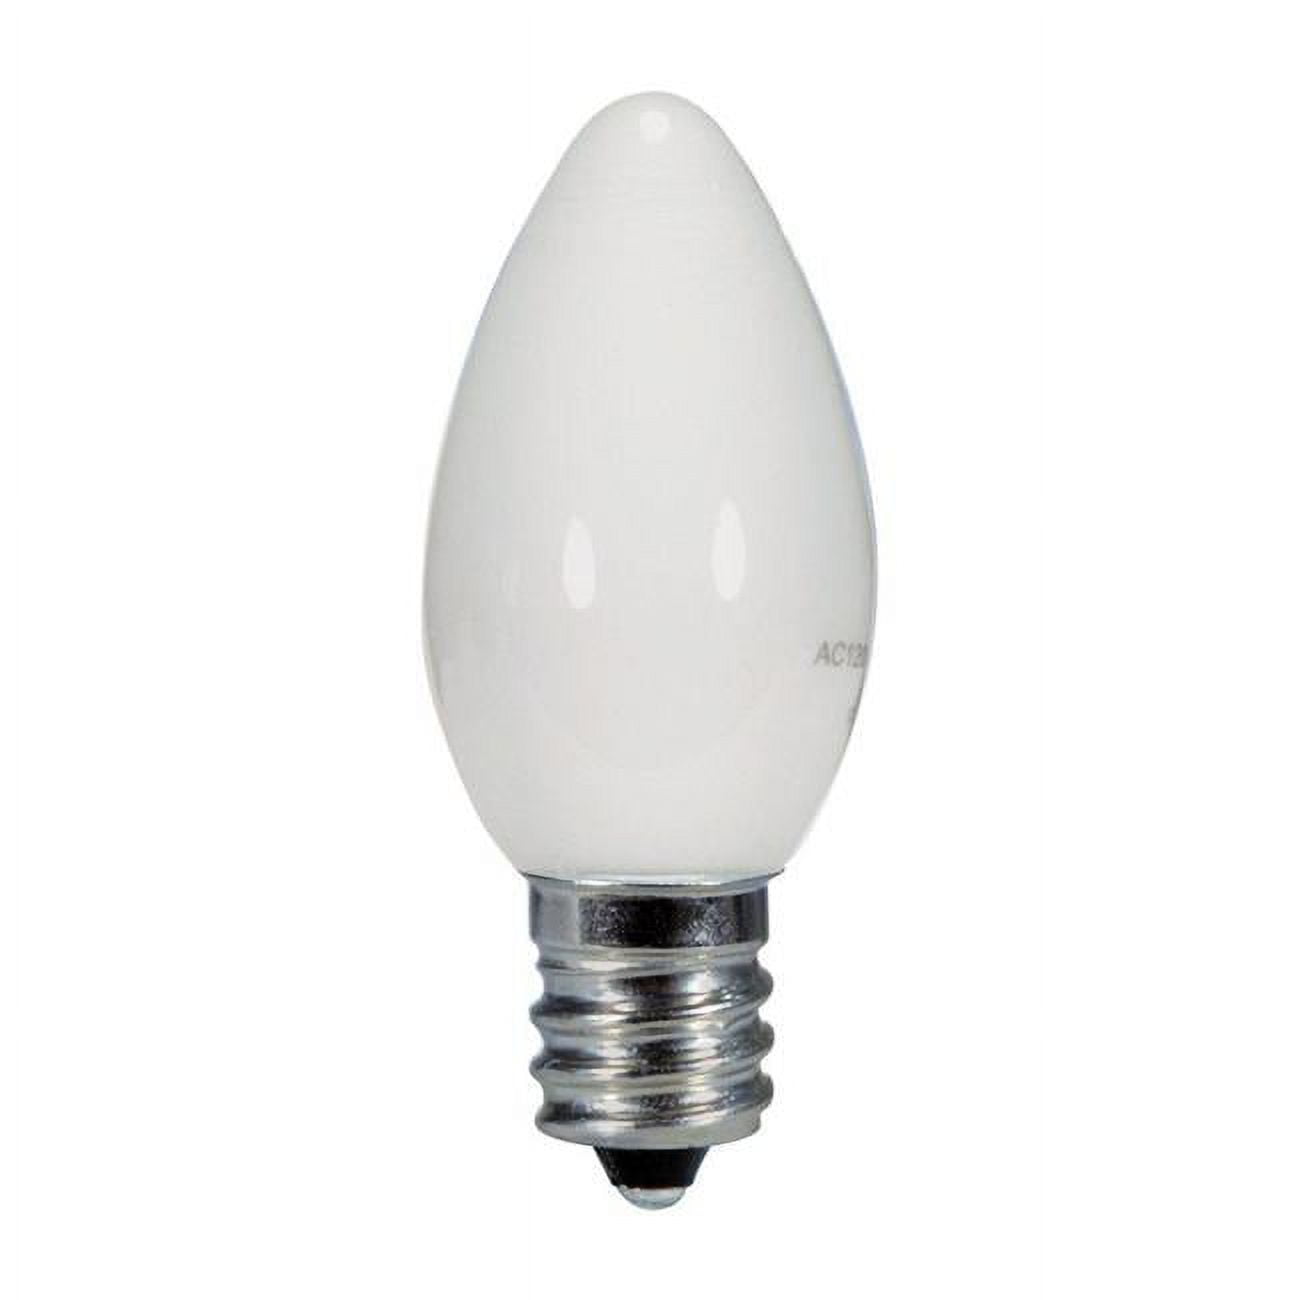 Picture of Satco 3862984 0.5W C7 LED Bulb, 14 Lumens - Warm White